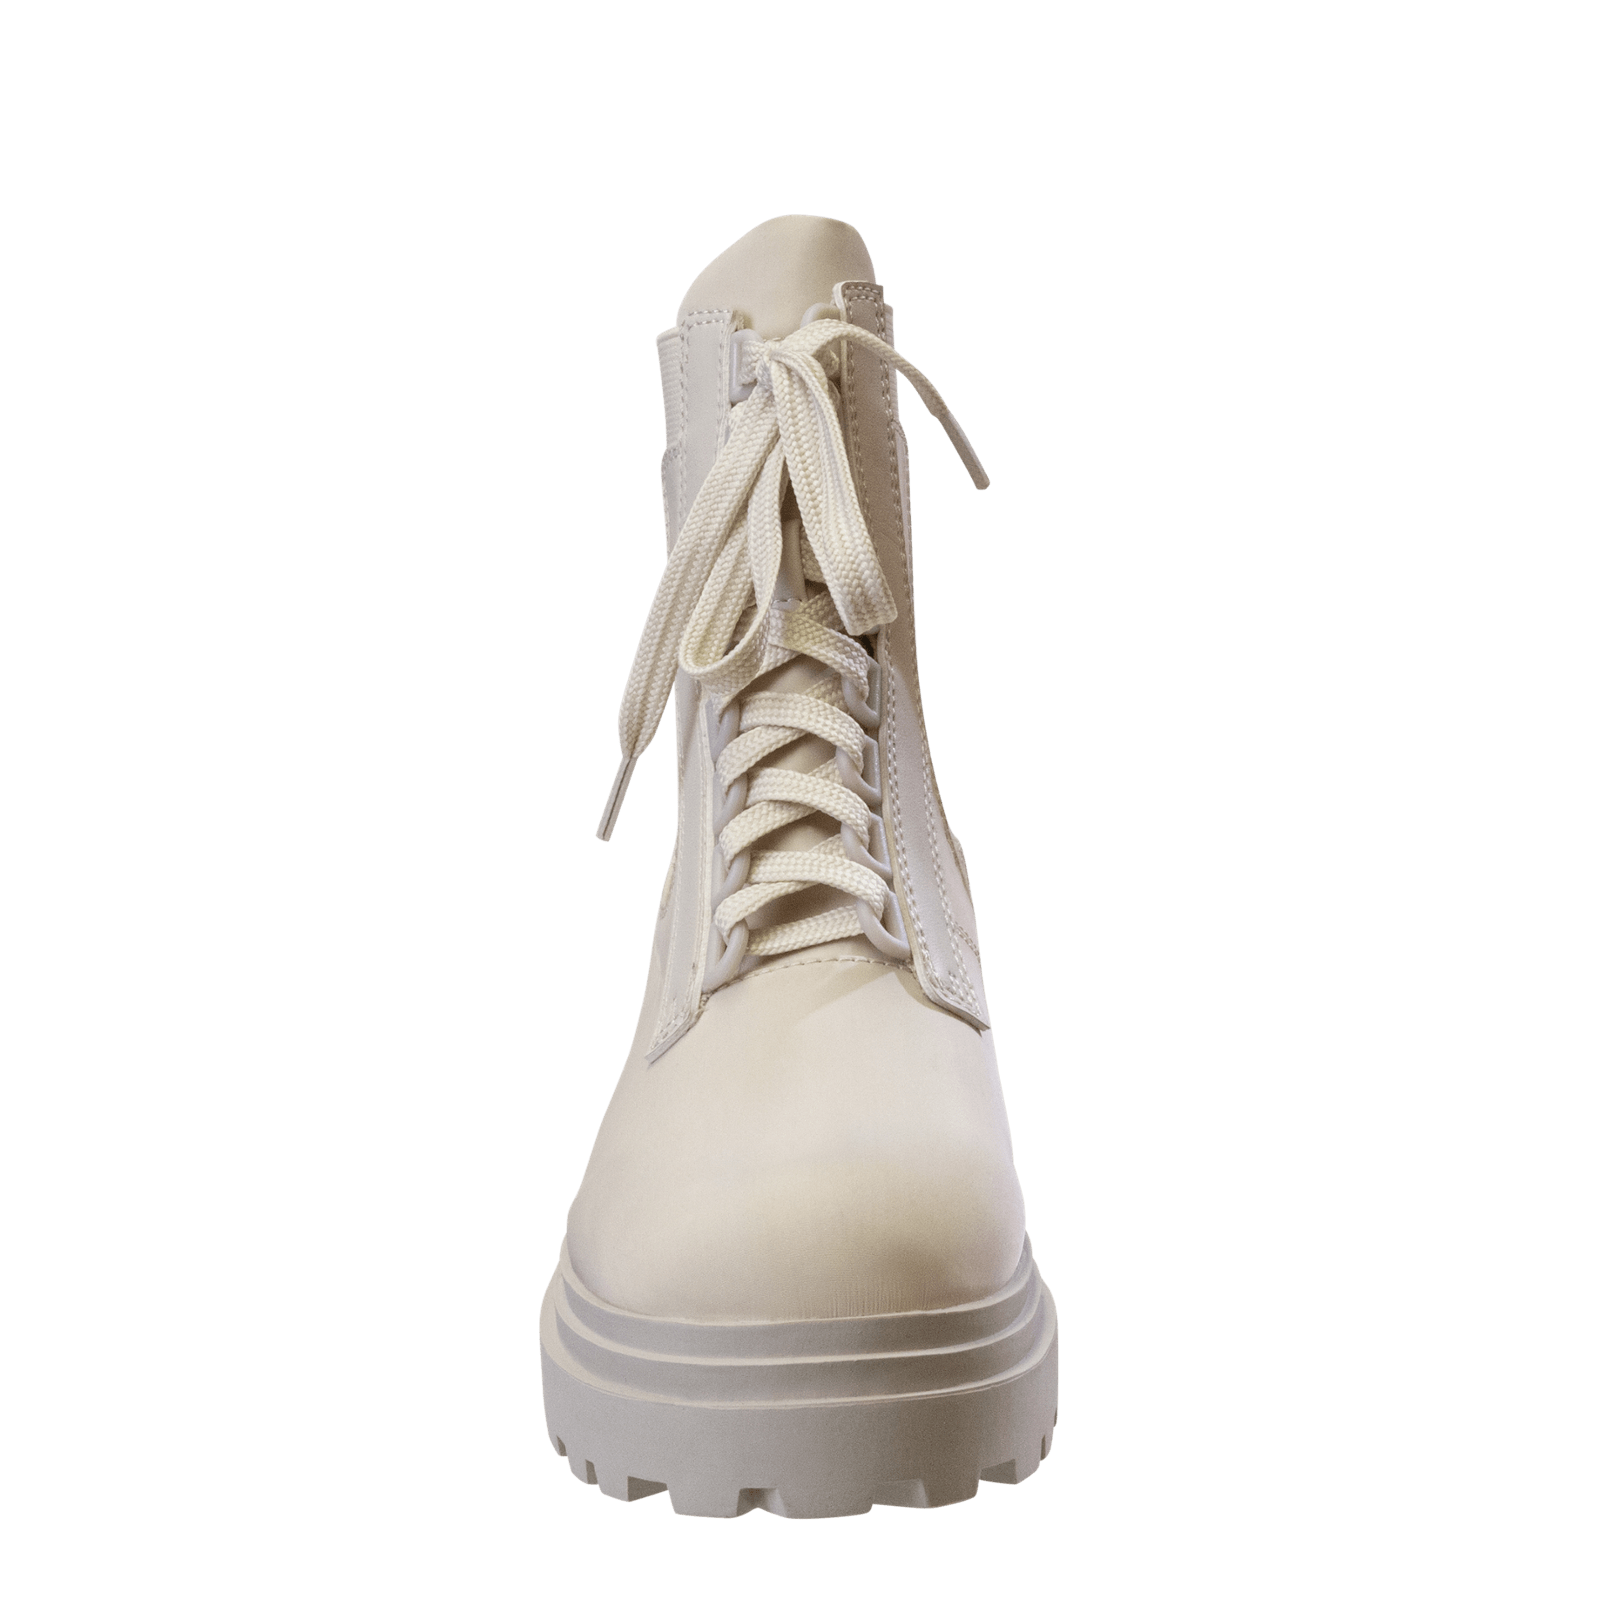 Khaki Lace Up Ankle Boots, Womens Boots